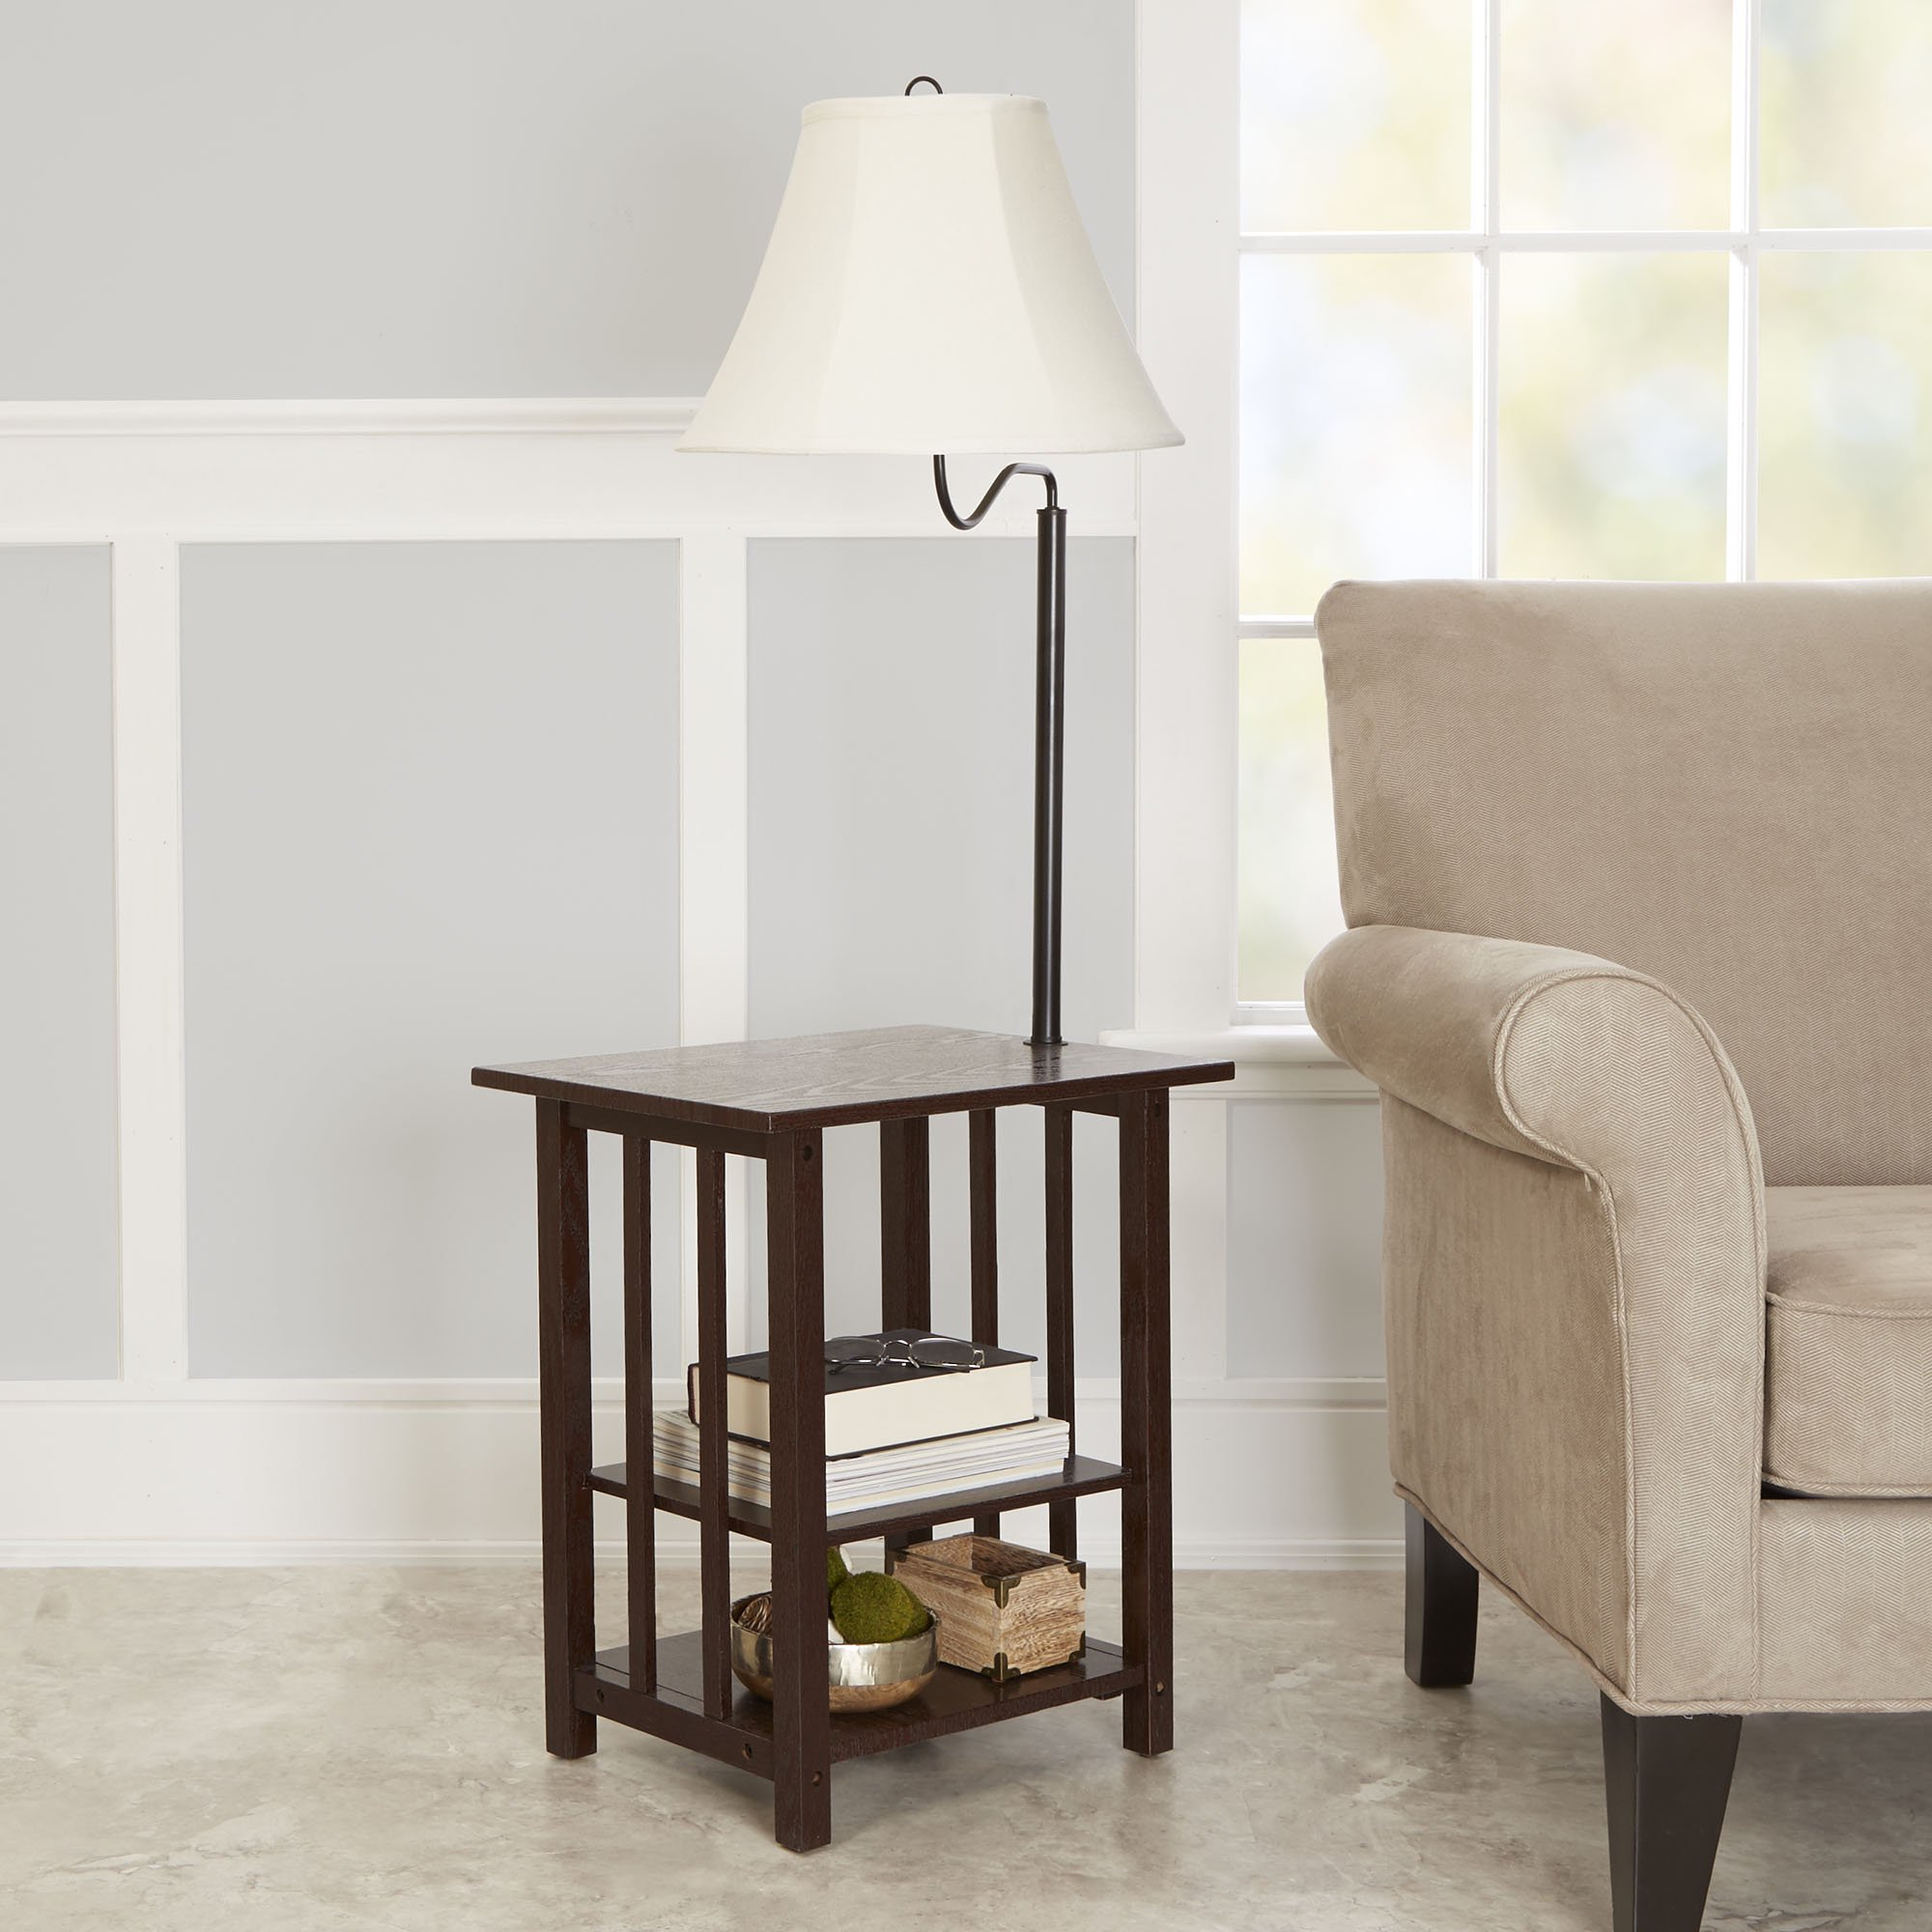 Better Homes Gardens 3 Rack End Table Floor Lamp Espresso Finish Walmart intended for size 2000 X 2000